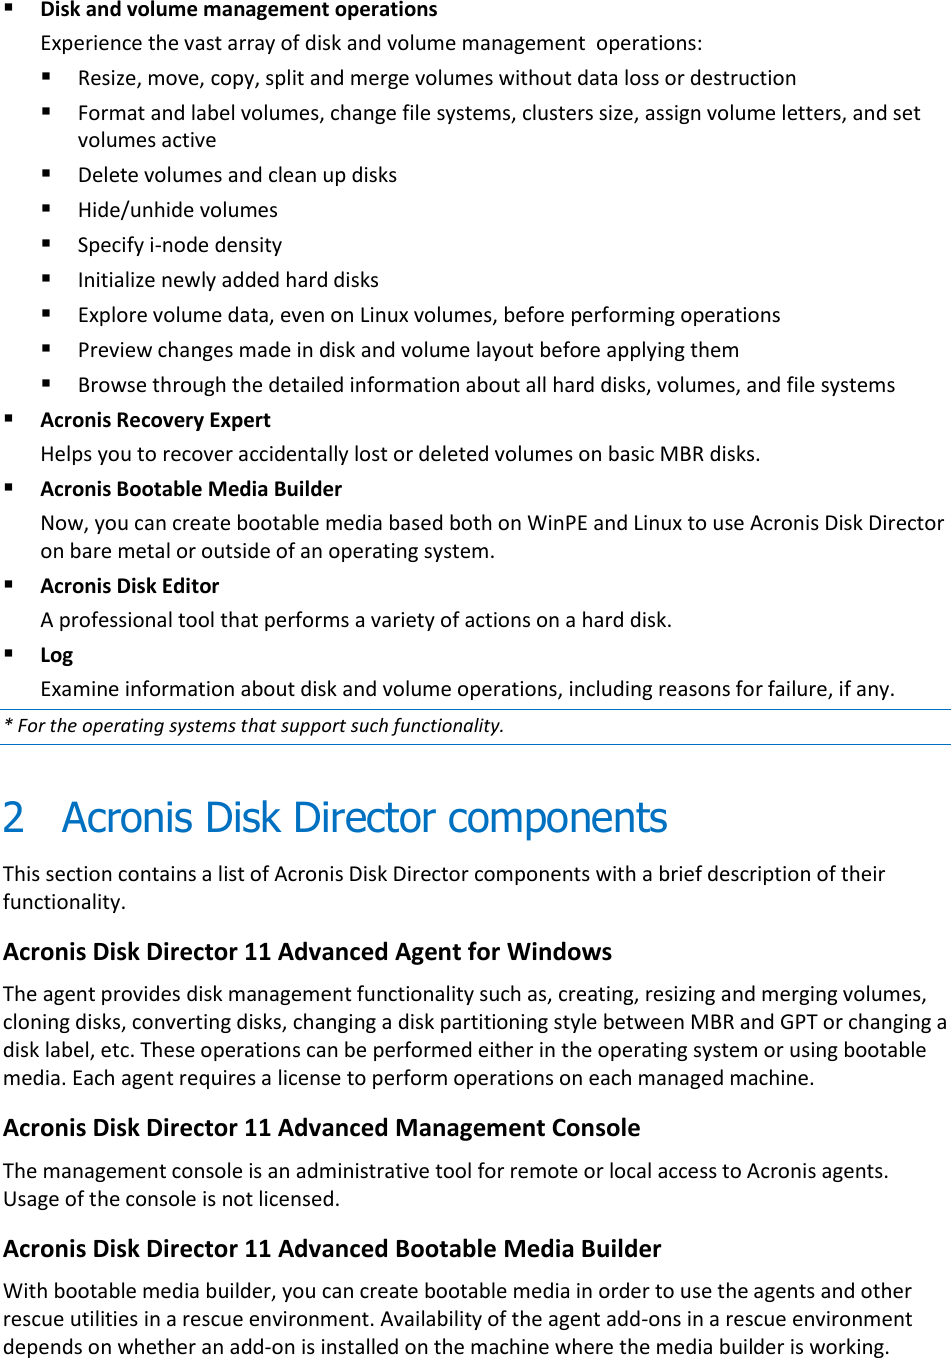 Page 4 of 9 - Acronis Acronis® Disk Director® 11 Qiuck Start Guide Director Advanced Server - 11.0 Quick ADD11AS Qsg En-US